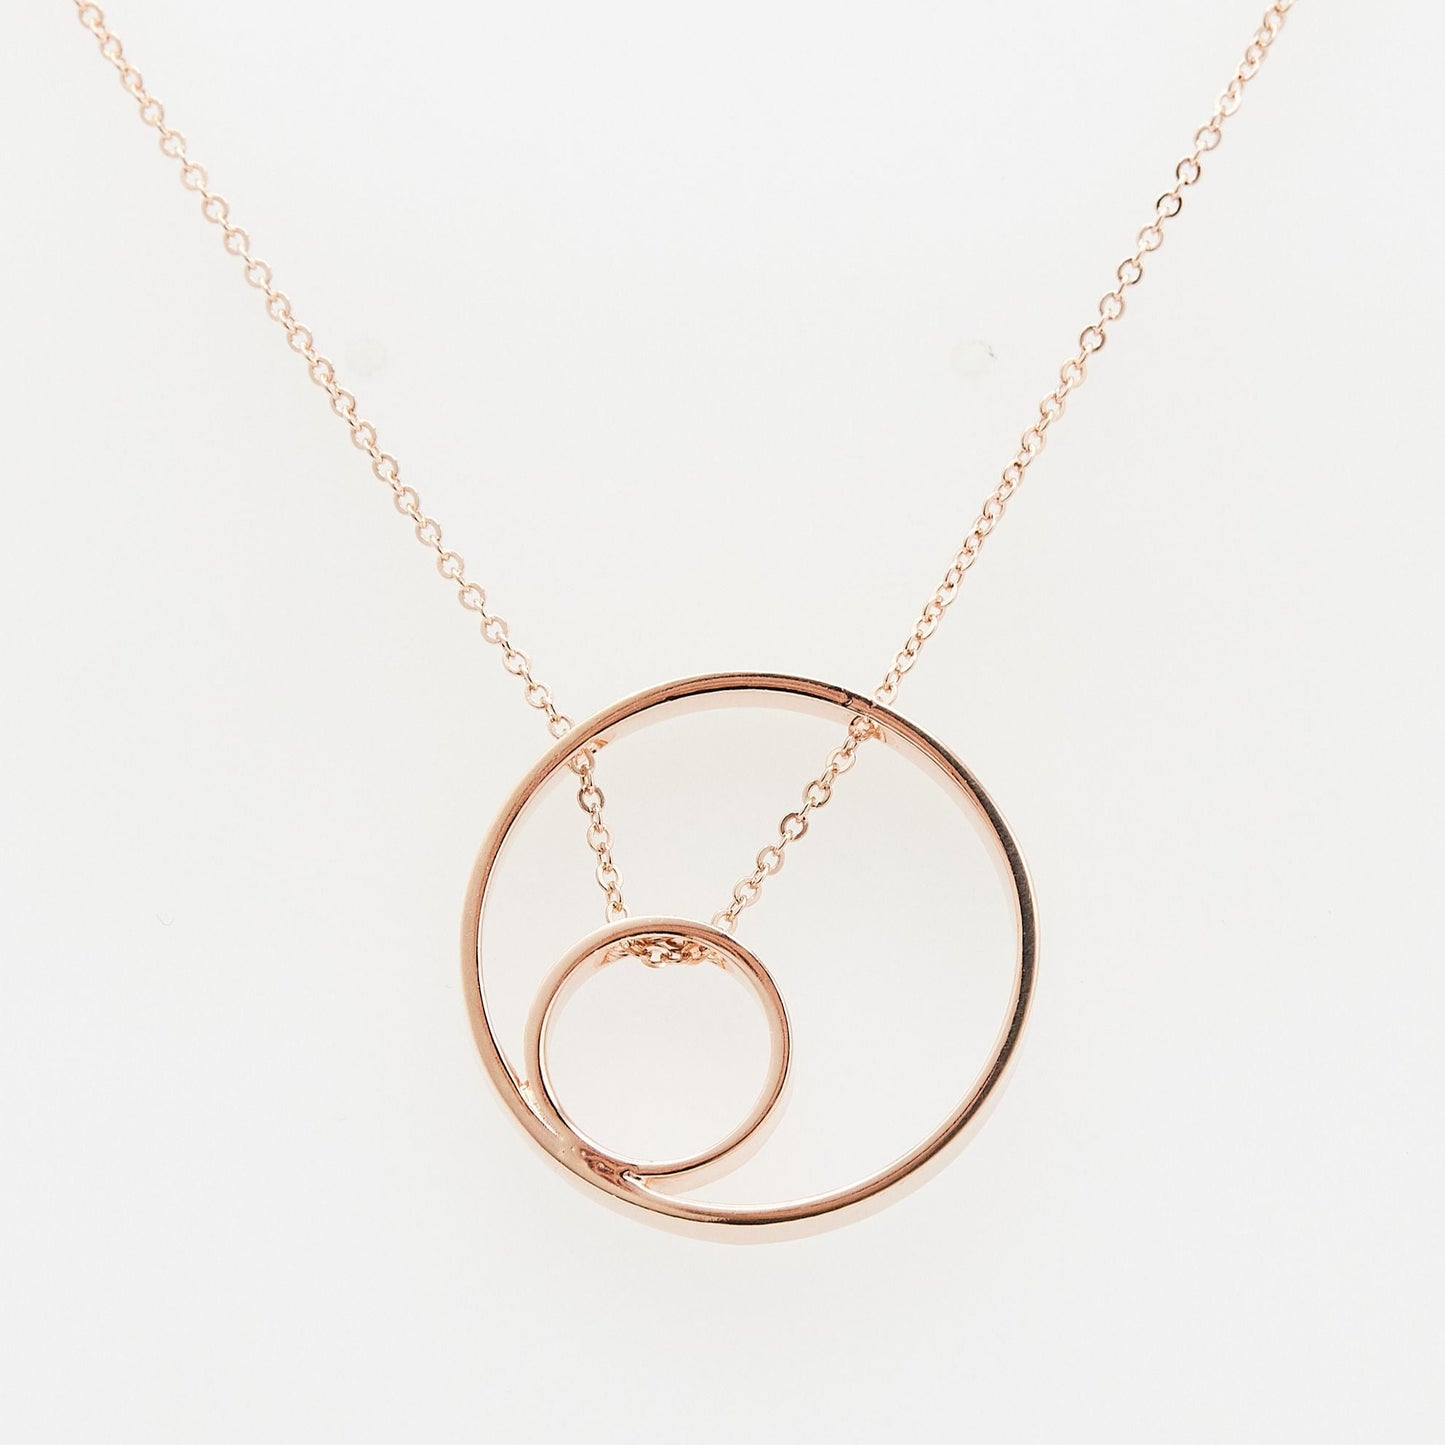 rose gold open circle pendant with small inner circle and chain threaded through on white background